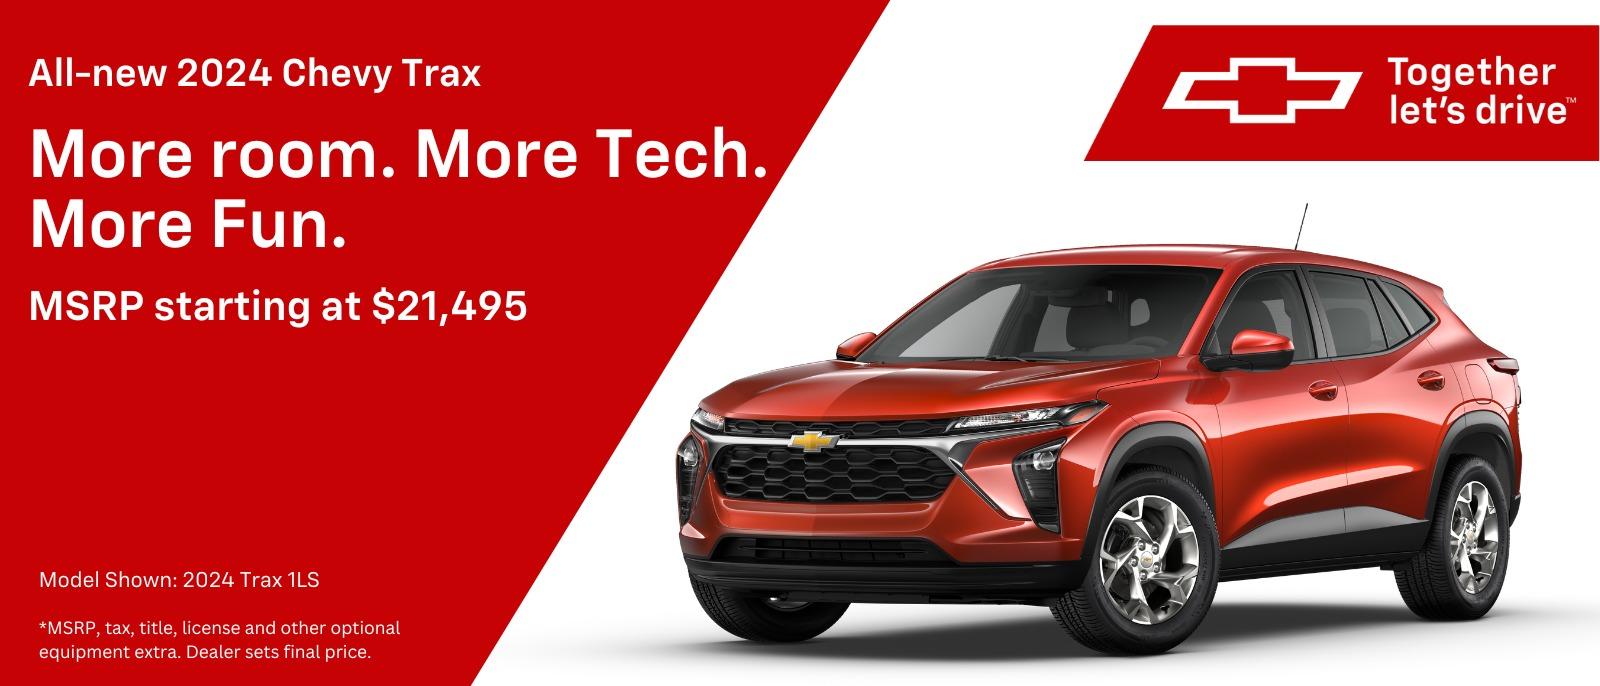 All-new 2024 Chevy Trax More room. More Tech. More Fun. MSRP starting at $21,495